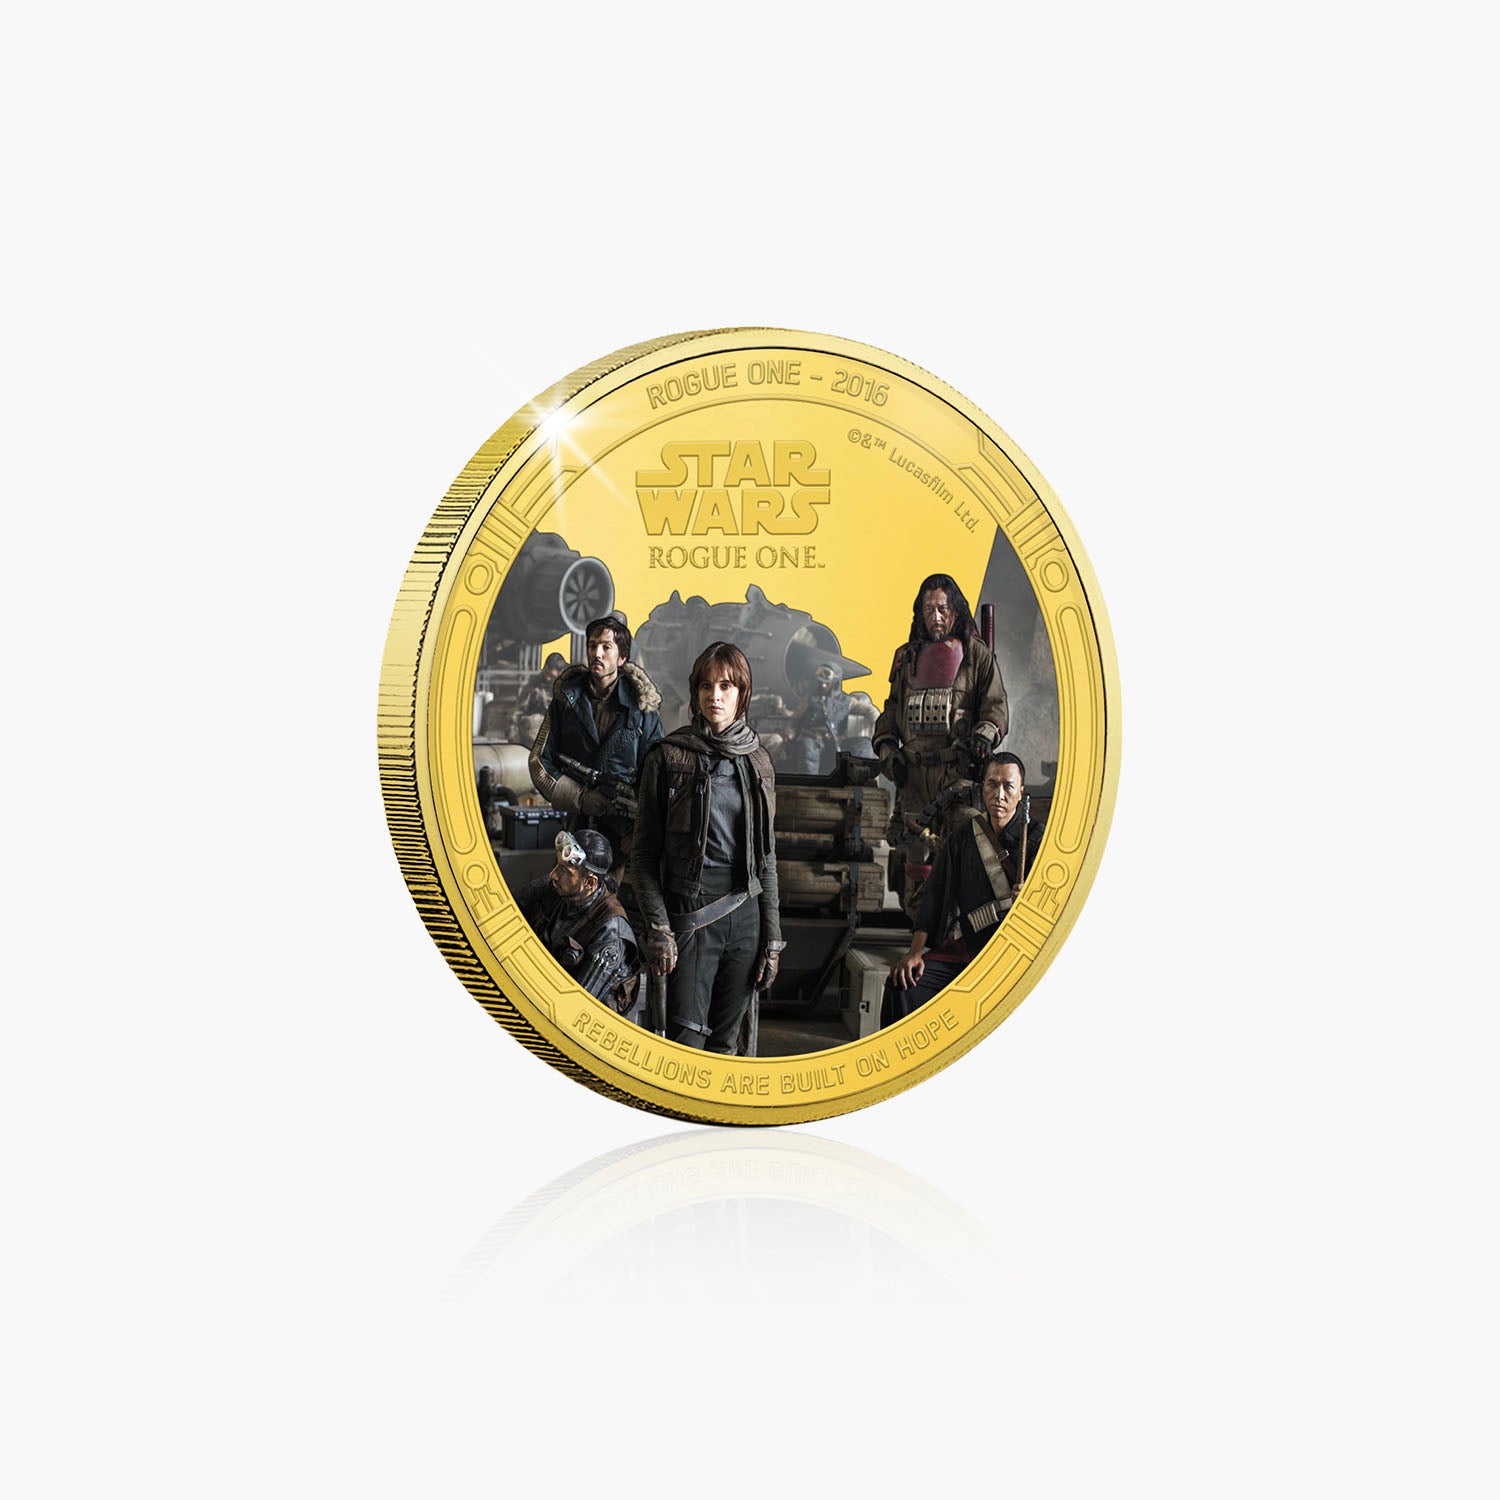 Rogue One Gold Plated Commemorative